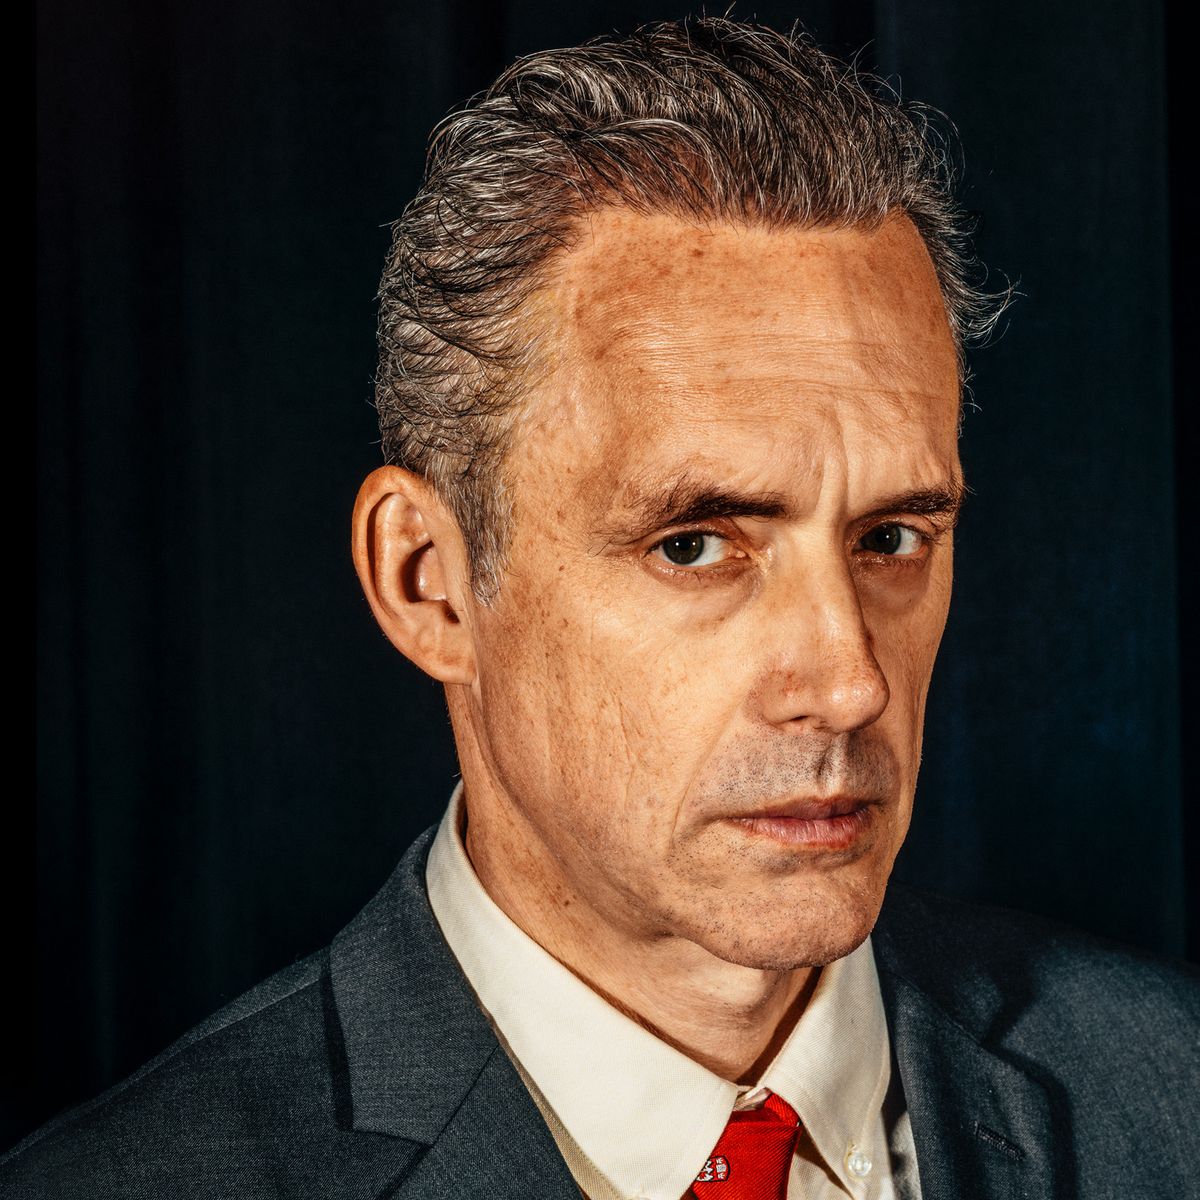 Jordan Peterson Political Correctness, the Radical Left, PC Culture 12 Rules for Life